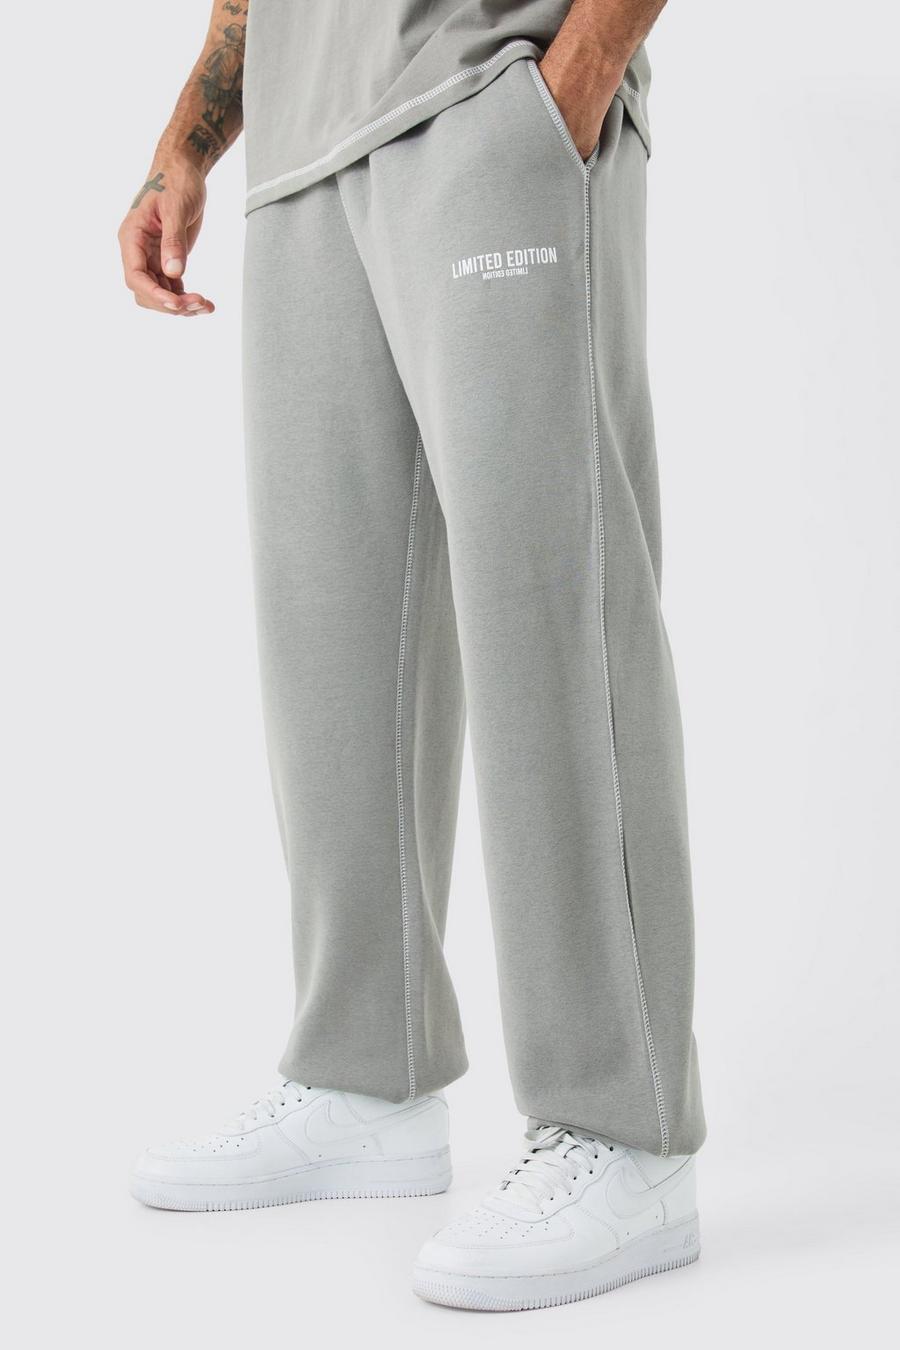 Charcoal Oversized Limited Edition Contrast Stitch Jogger